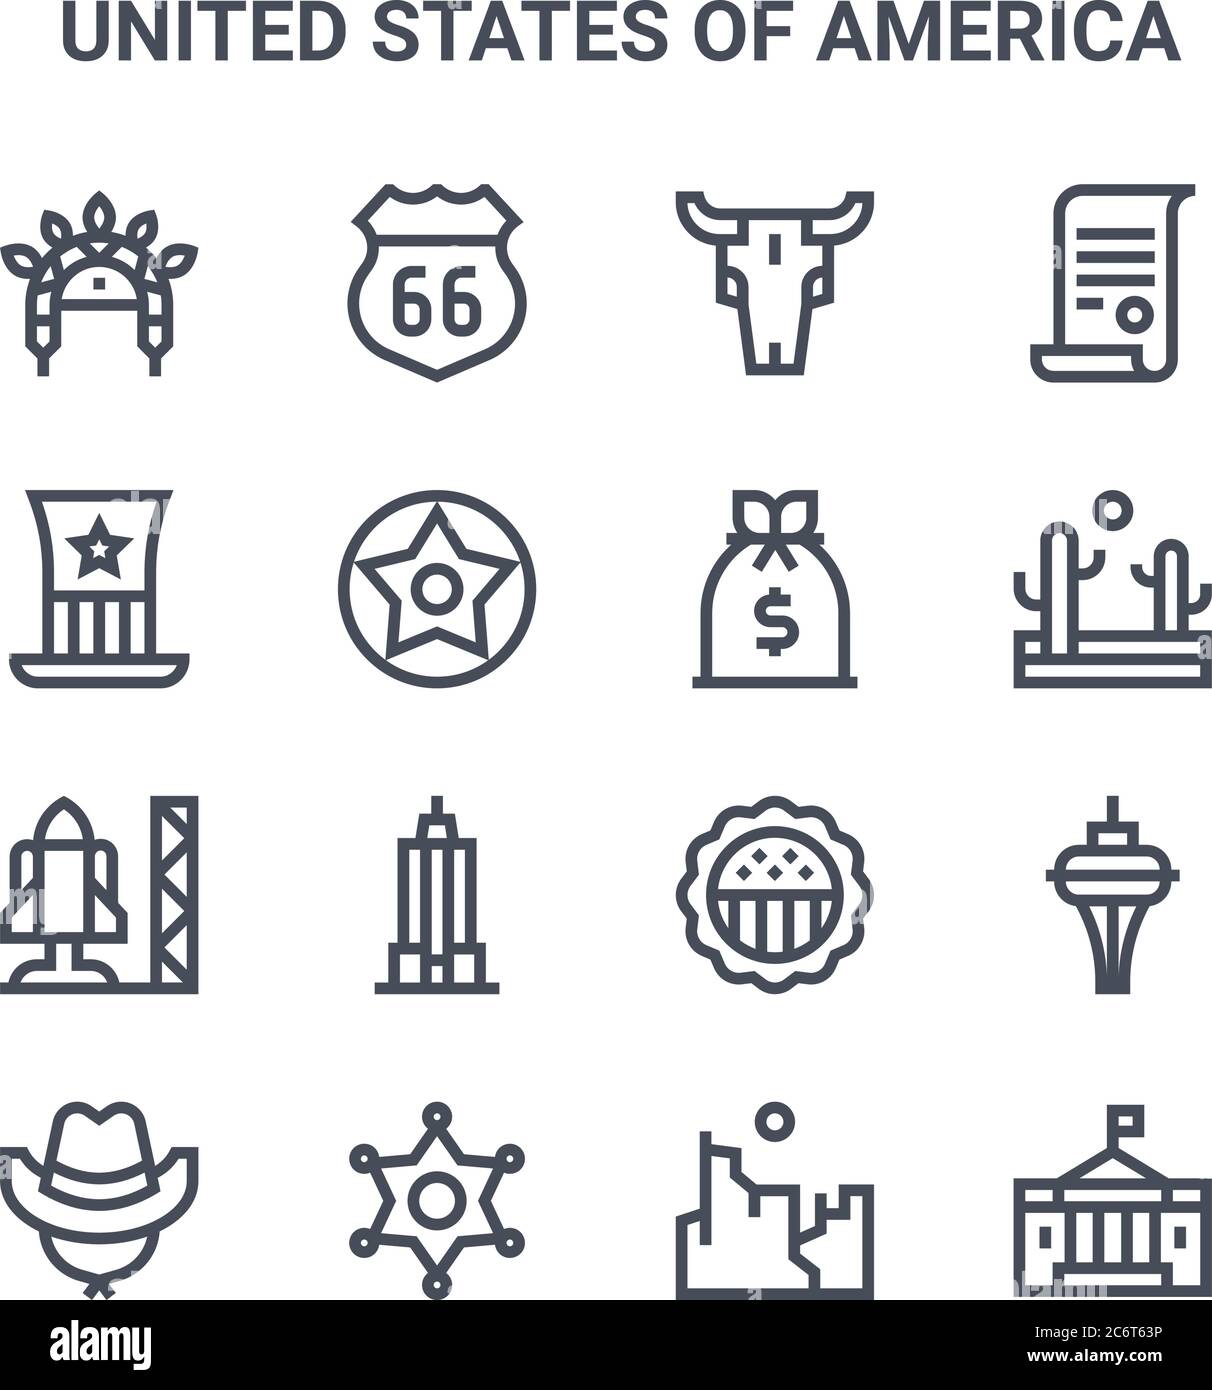 set of 16 united states of america concept vector line icons. 64x64 thin stroke icons such as route, usa, desert, american, sheriff badge, white house Stock Vector